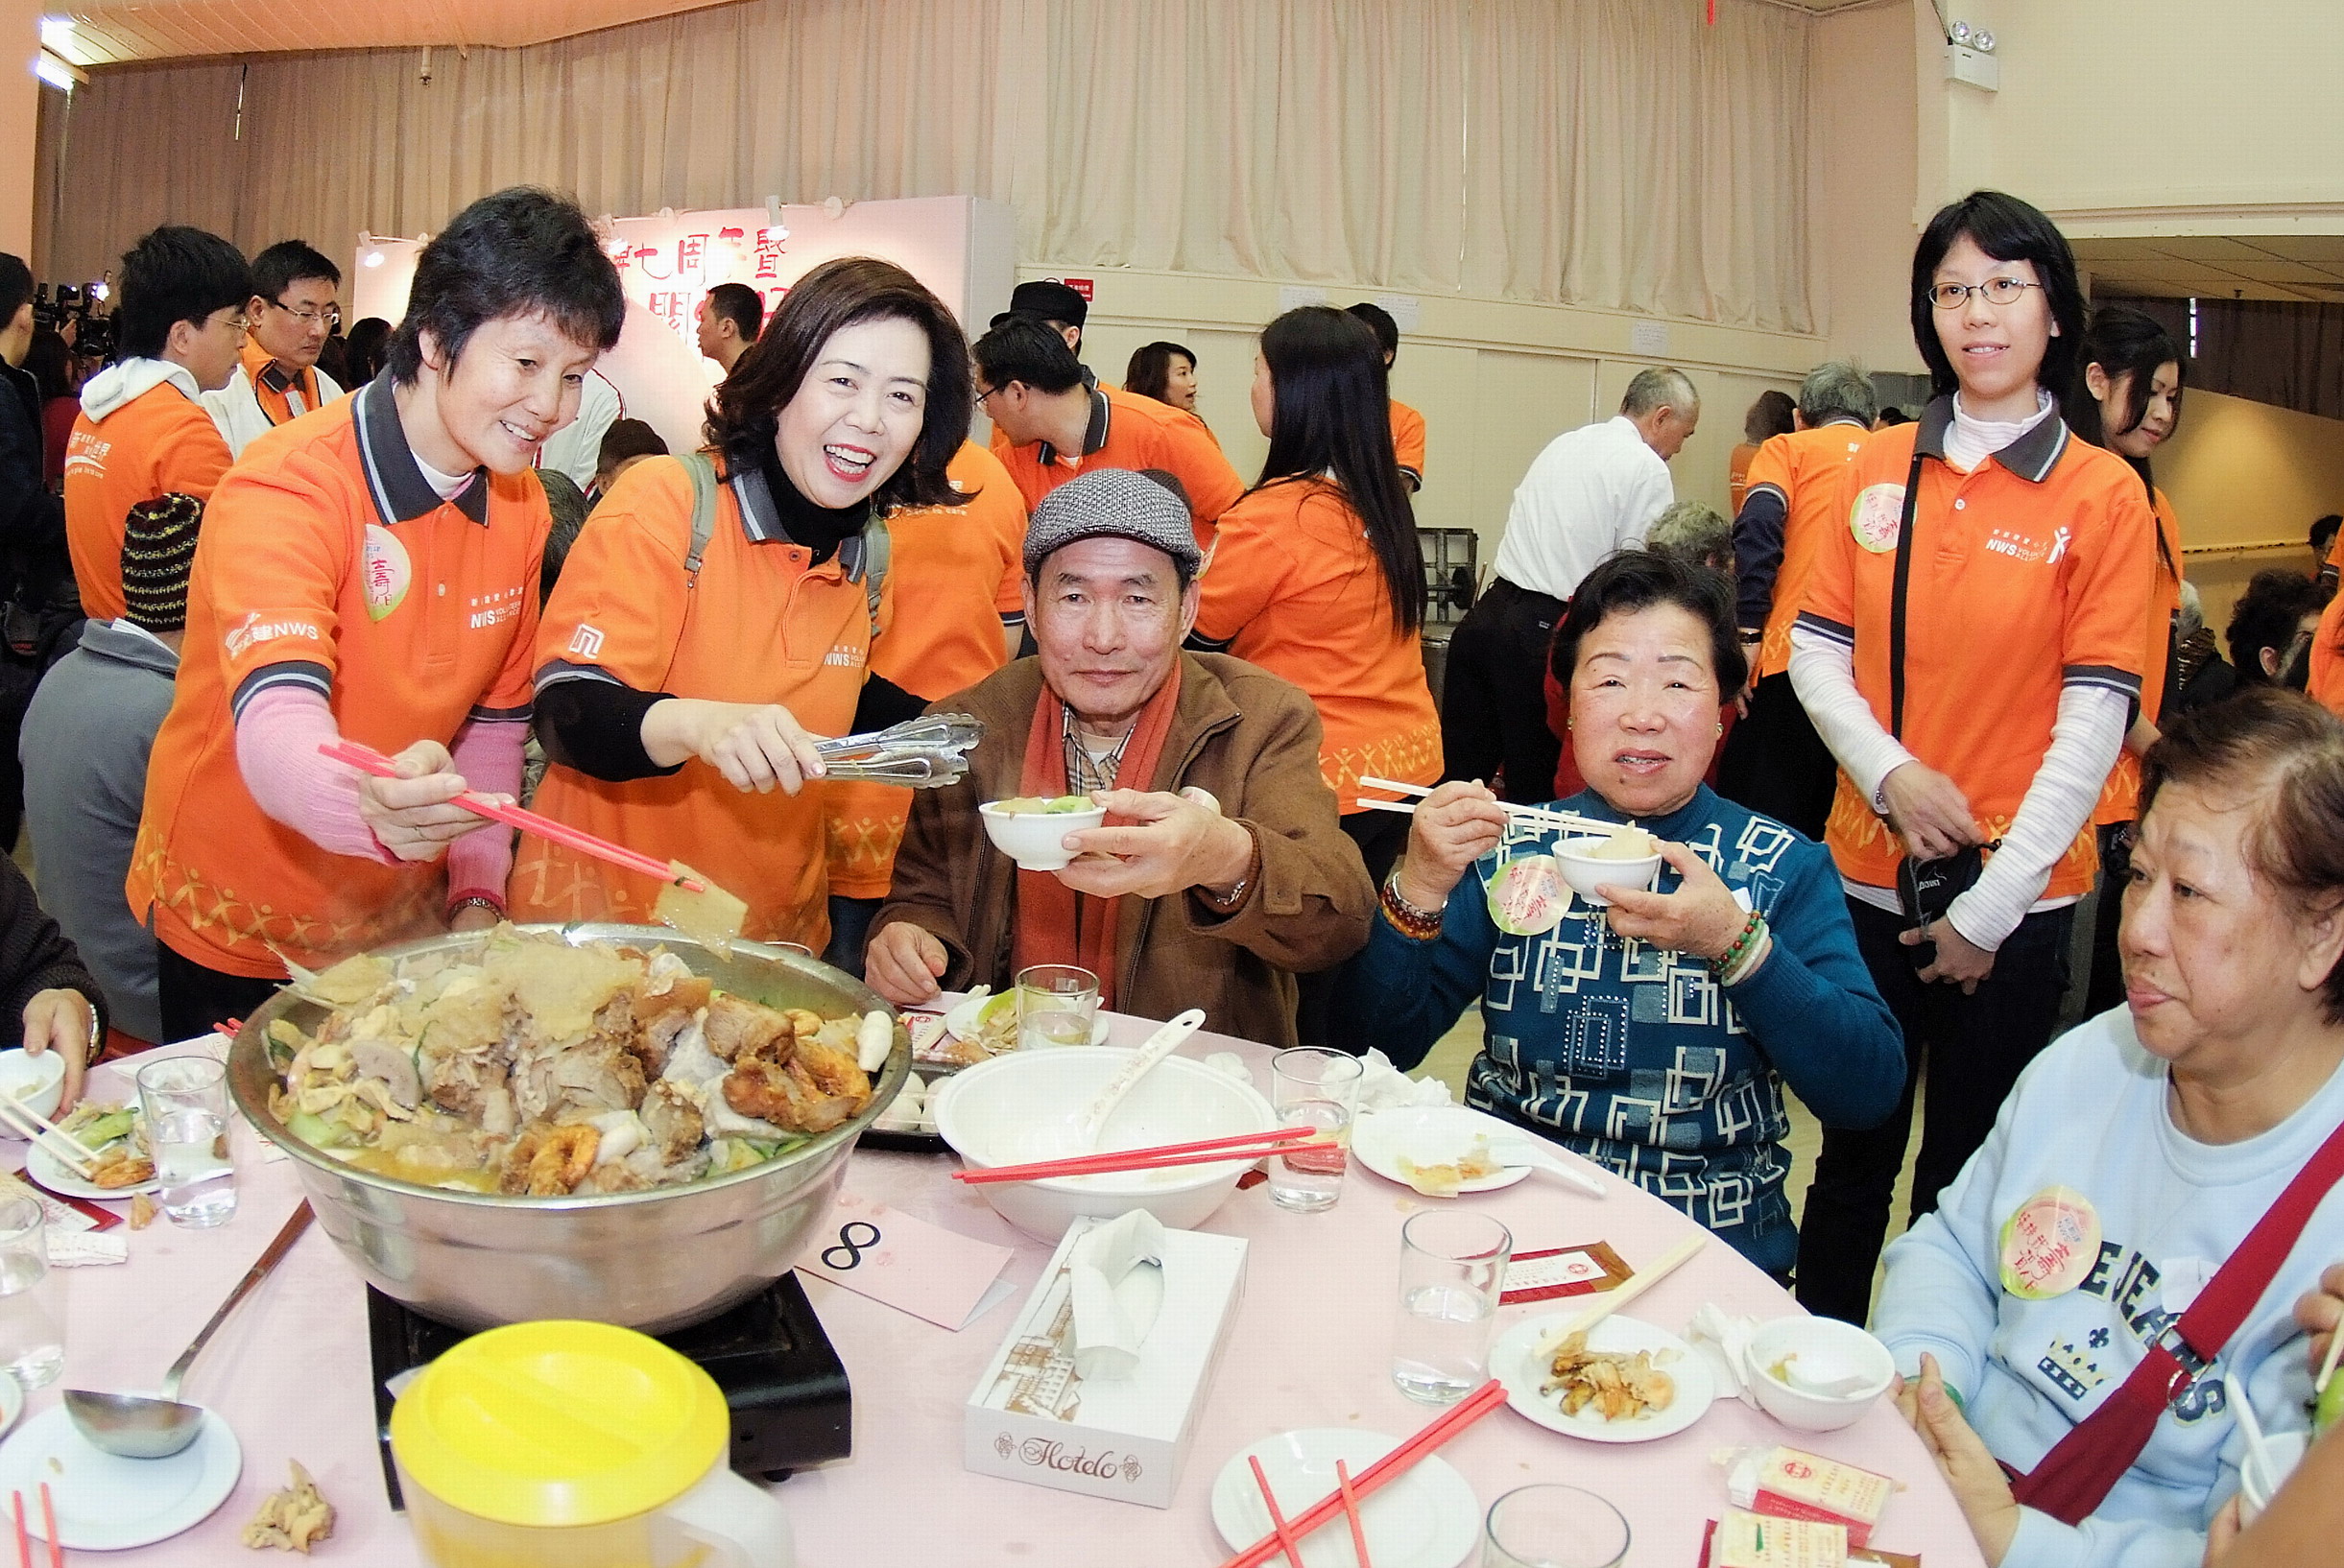 NWS Holdings celebrated “Renri” (“人日”) with deprived elderly on NWS Caring Day 2010